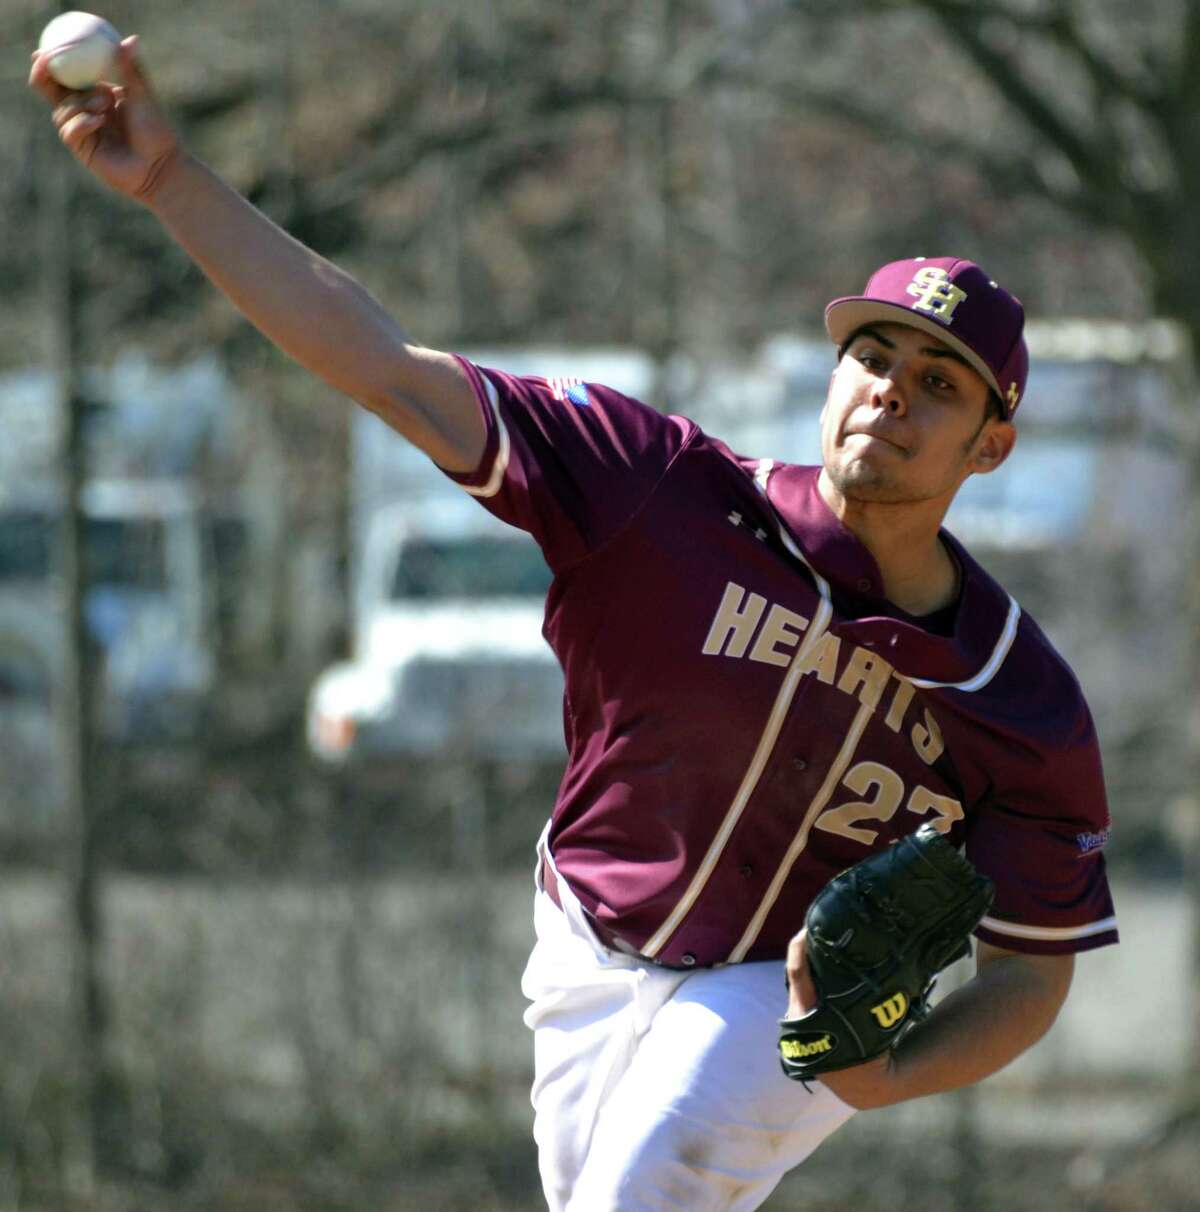 Sacred Heart pitcher Hector Alejandro pitches against Holy Cross on Friday, April 20, 2018.